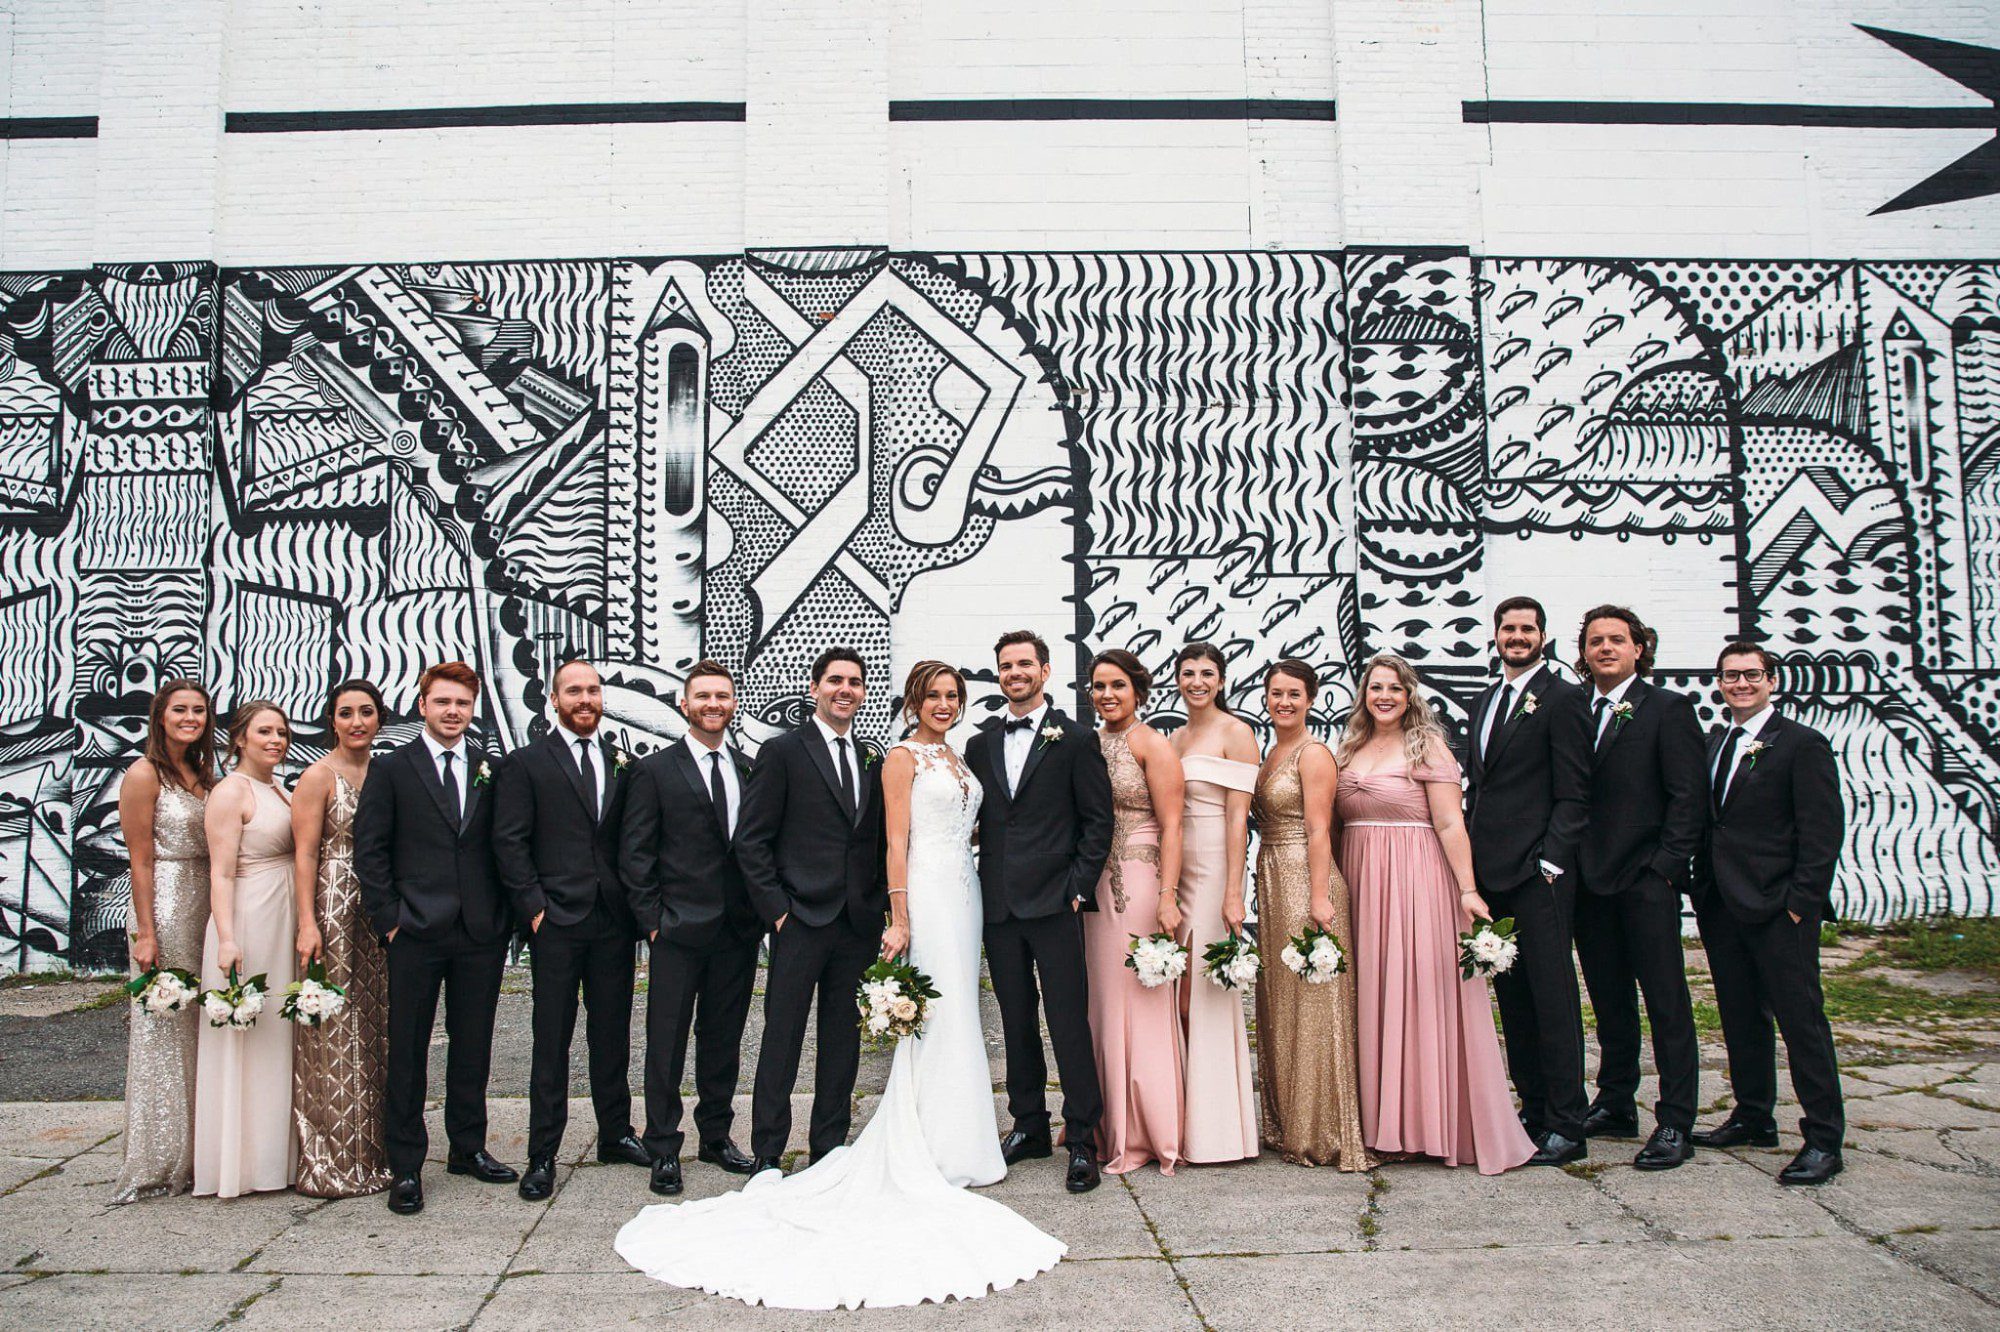 wedding party photo in front of mural